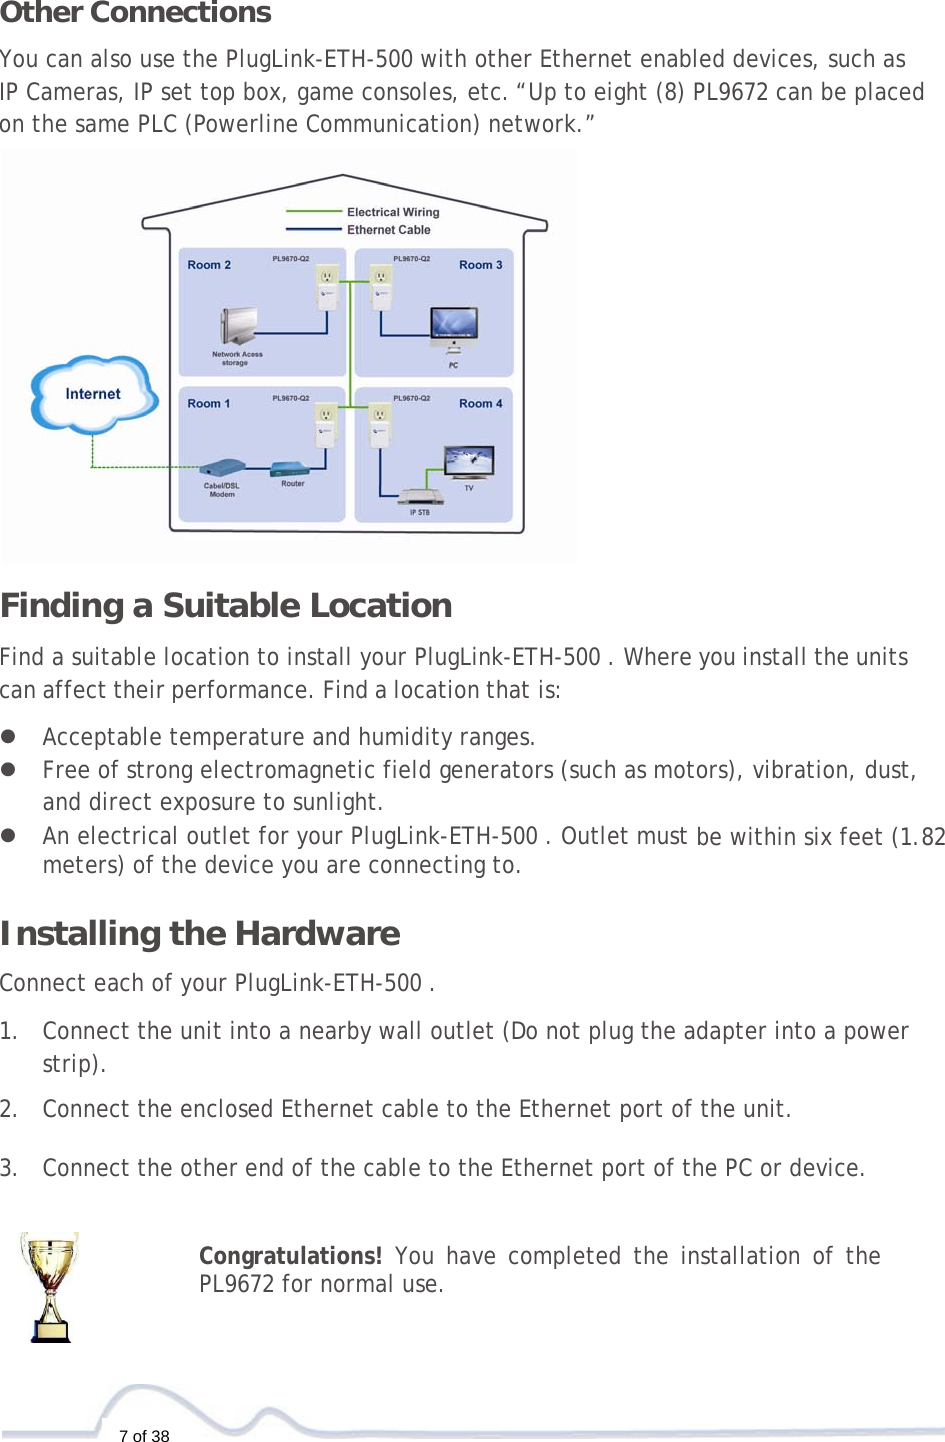  7 of 38  Other Connections  You can also use the PlugLink-ETH-500 with other Ethernet enabled devices, such as IP Cameras, IP set top box, game consoles, etc.“Up to eight (8) PL9672 can be placed on the same PLC (Powerline Communication) network.”  Finding a Suitable Location  Find a suitable location to install your PlugLink-ETH-500 . Where you install the units can affect their performance. Find a location that is:  z Acceptable temperature and humidity ranges. z Free of strong electromagnetic field generators (such as motors), vibration, dust, and direct exposure to sunlight. z An electrical outlet for your PlugLink-ETH-500 . Outlet must be within six feet (1.82 meters) of the device you are connecting to.   Installing the Hardware  Connect each of your PlugLink-ETH-500 .  1. Connect the unit into a nearby wall outlet (Do not plug the adapter into a power strip).  2. Connect the enclosed Ethernet cable to the Ethernet port of the unit.   3. Connect the other end of the cable to the Ethernet port of the PC or device.   Congratulations! You have completed the installation of the PL9672 for normal use. 